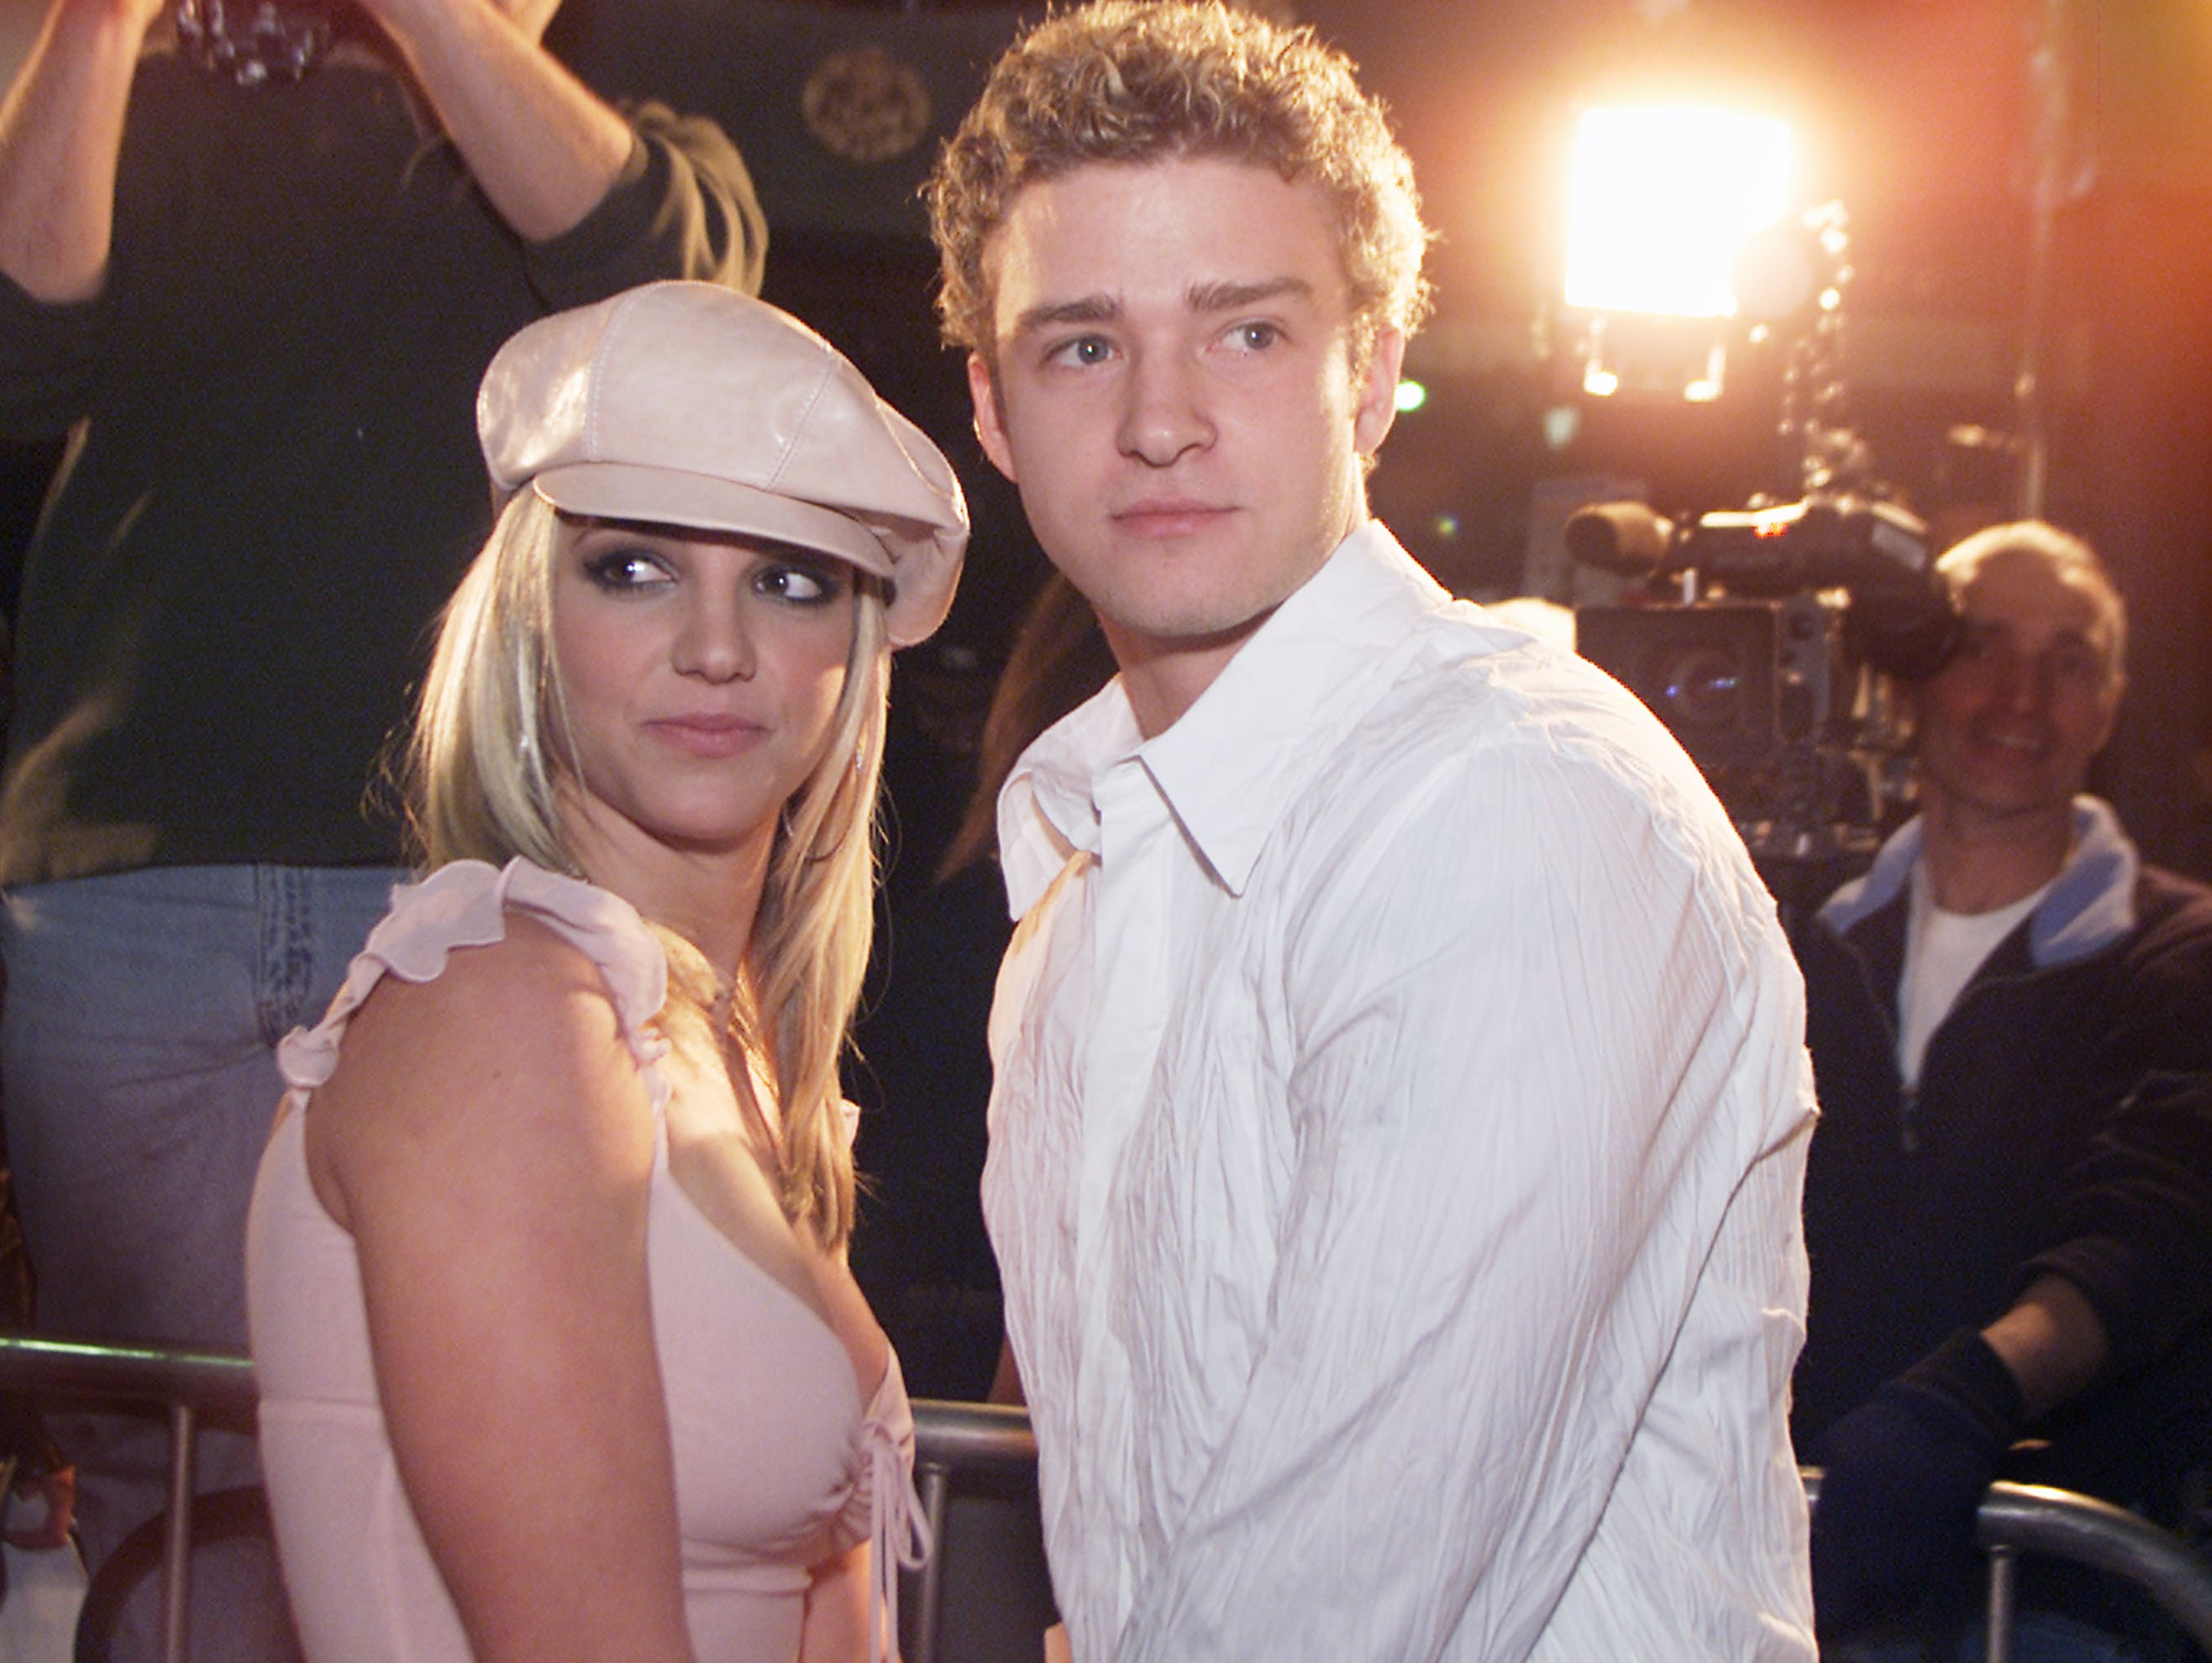 Spears with Justin Timberlake at the ‘Crossroads’ premiere